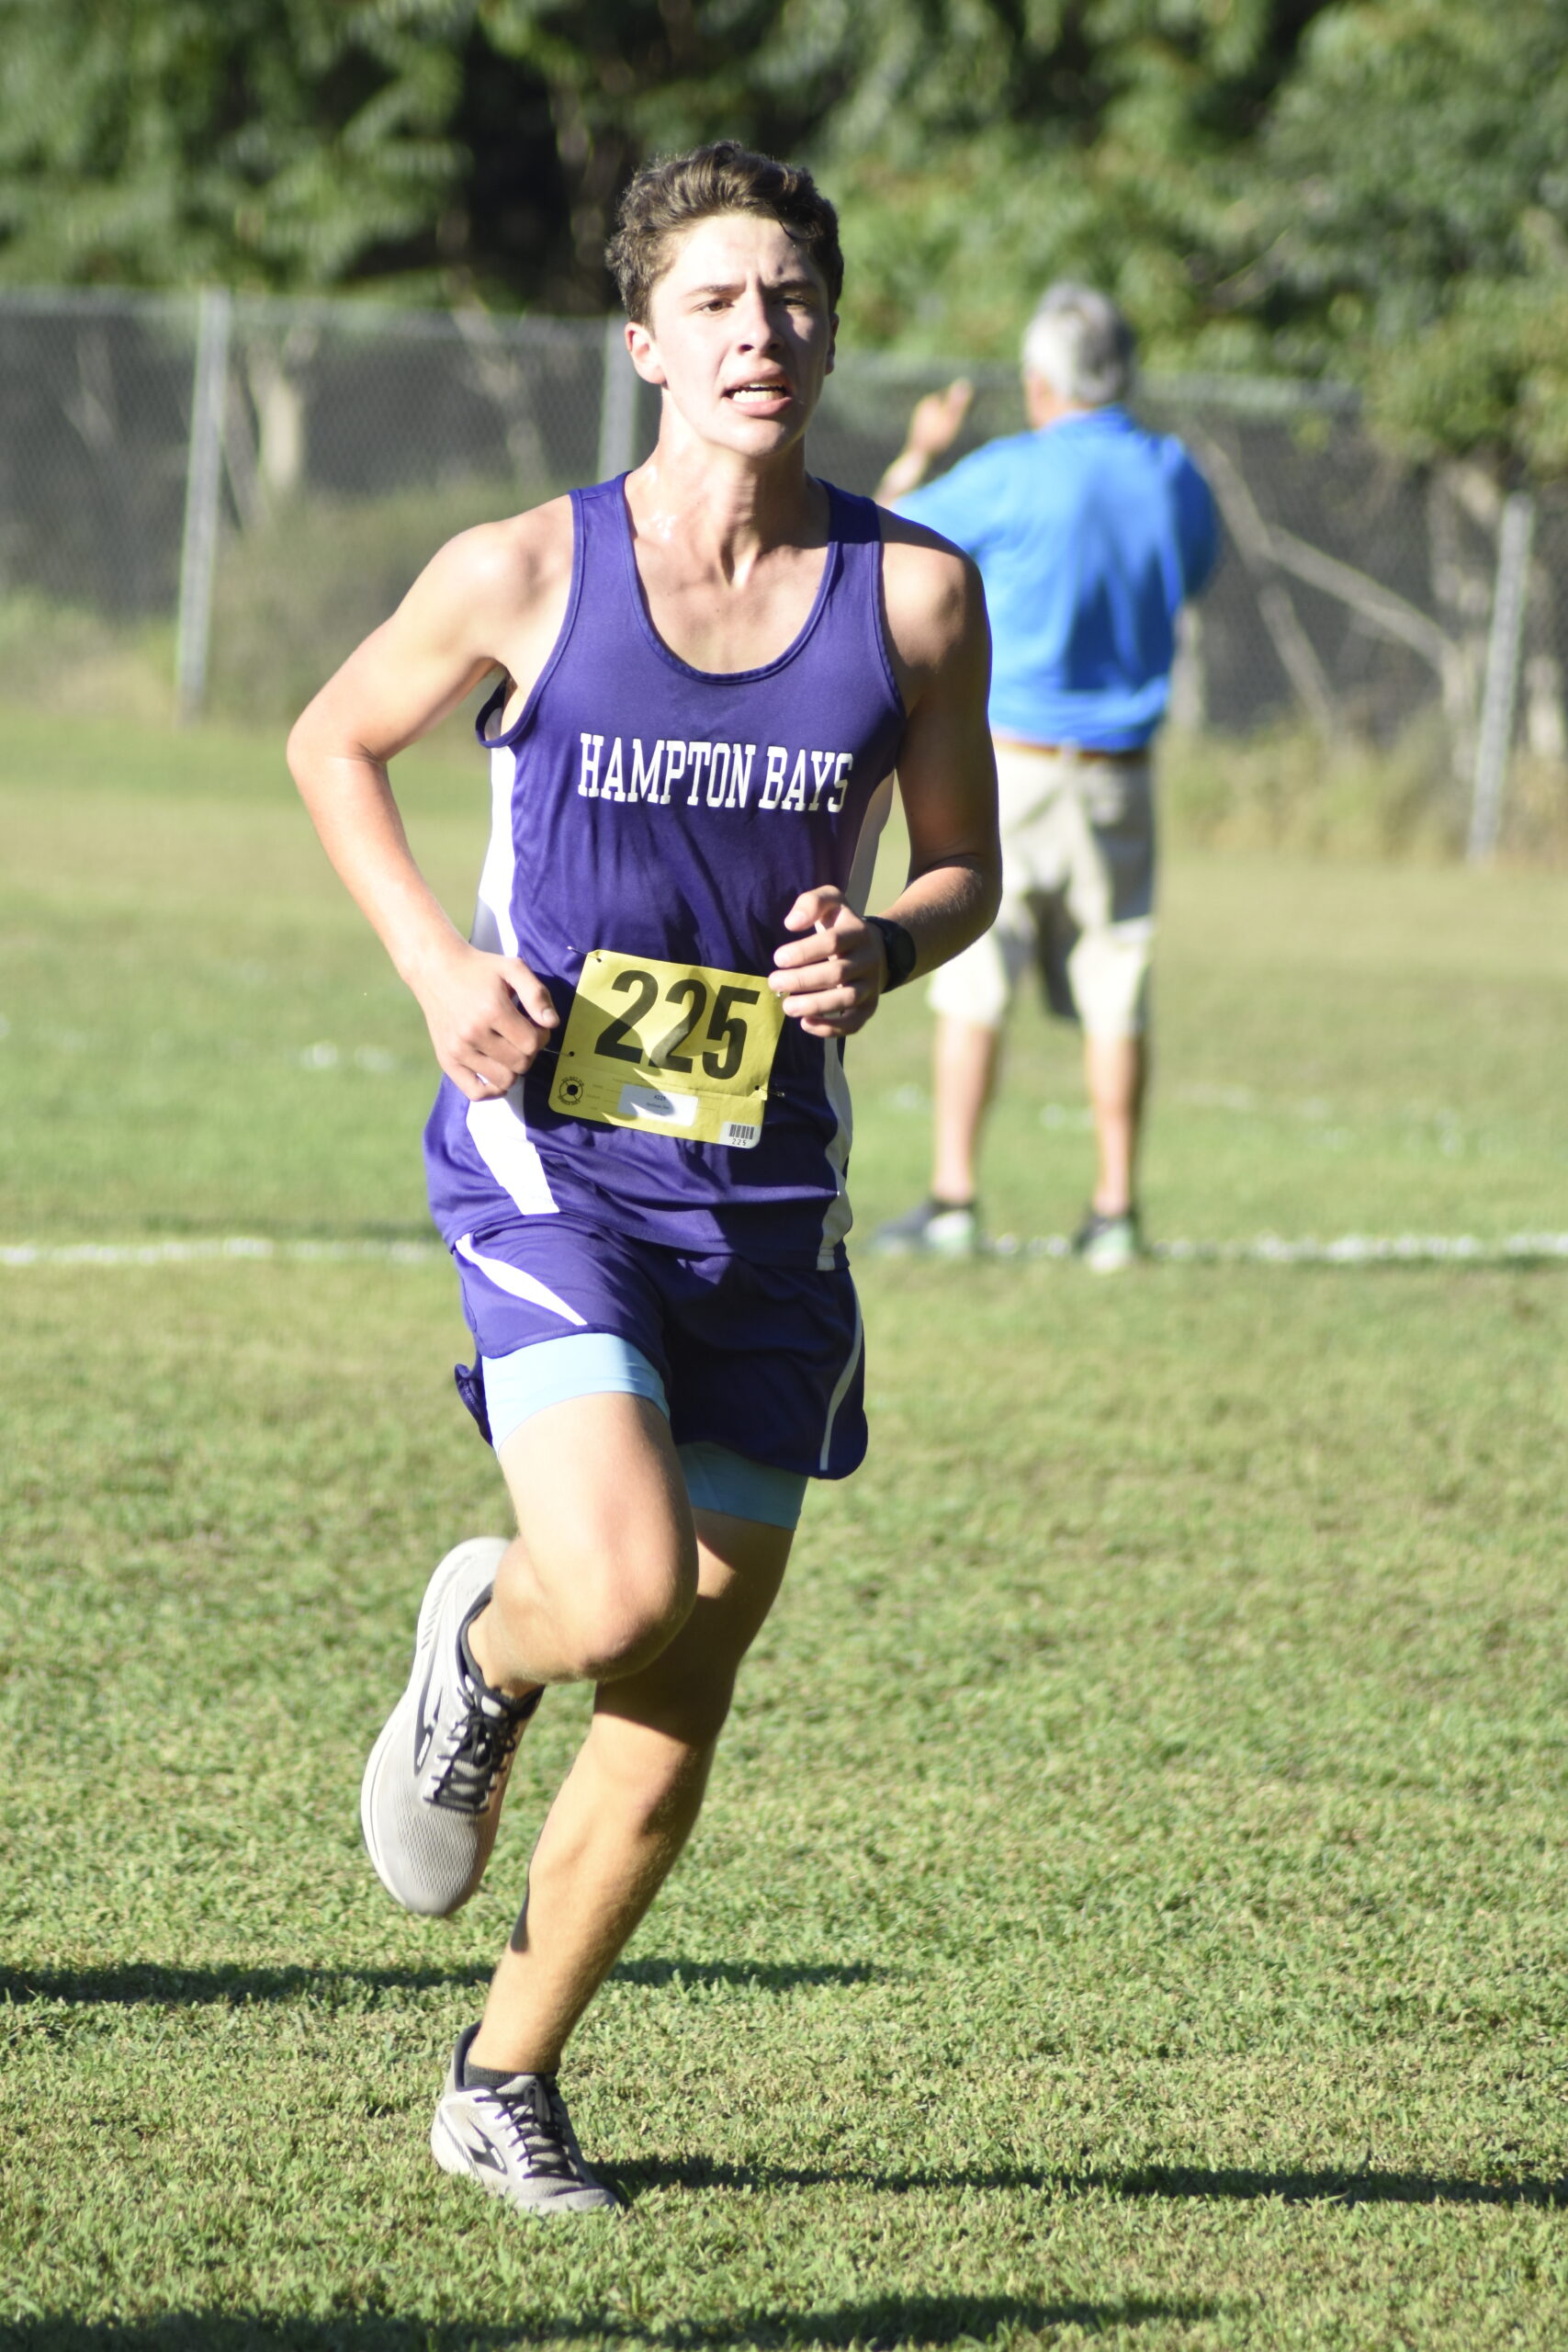 Ben Spellman was the first Bayman to cross the finish line of the varsity boys race of the Peconic Invitational on September 15..    DREW BUDD